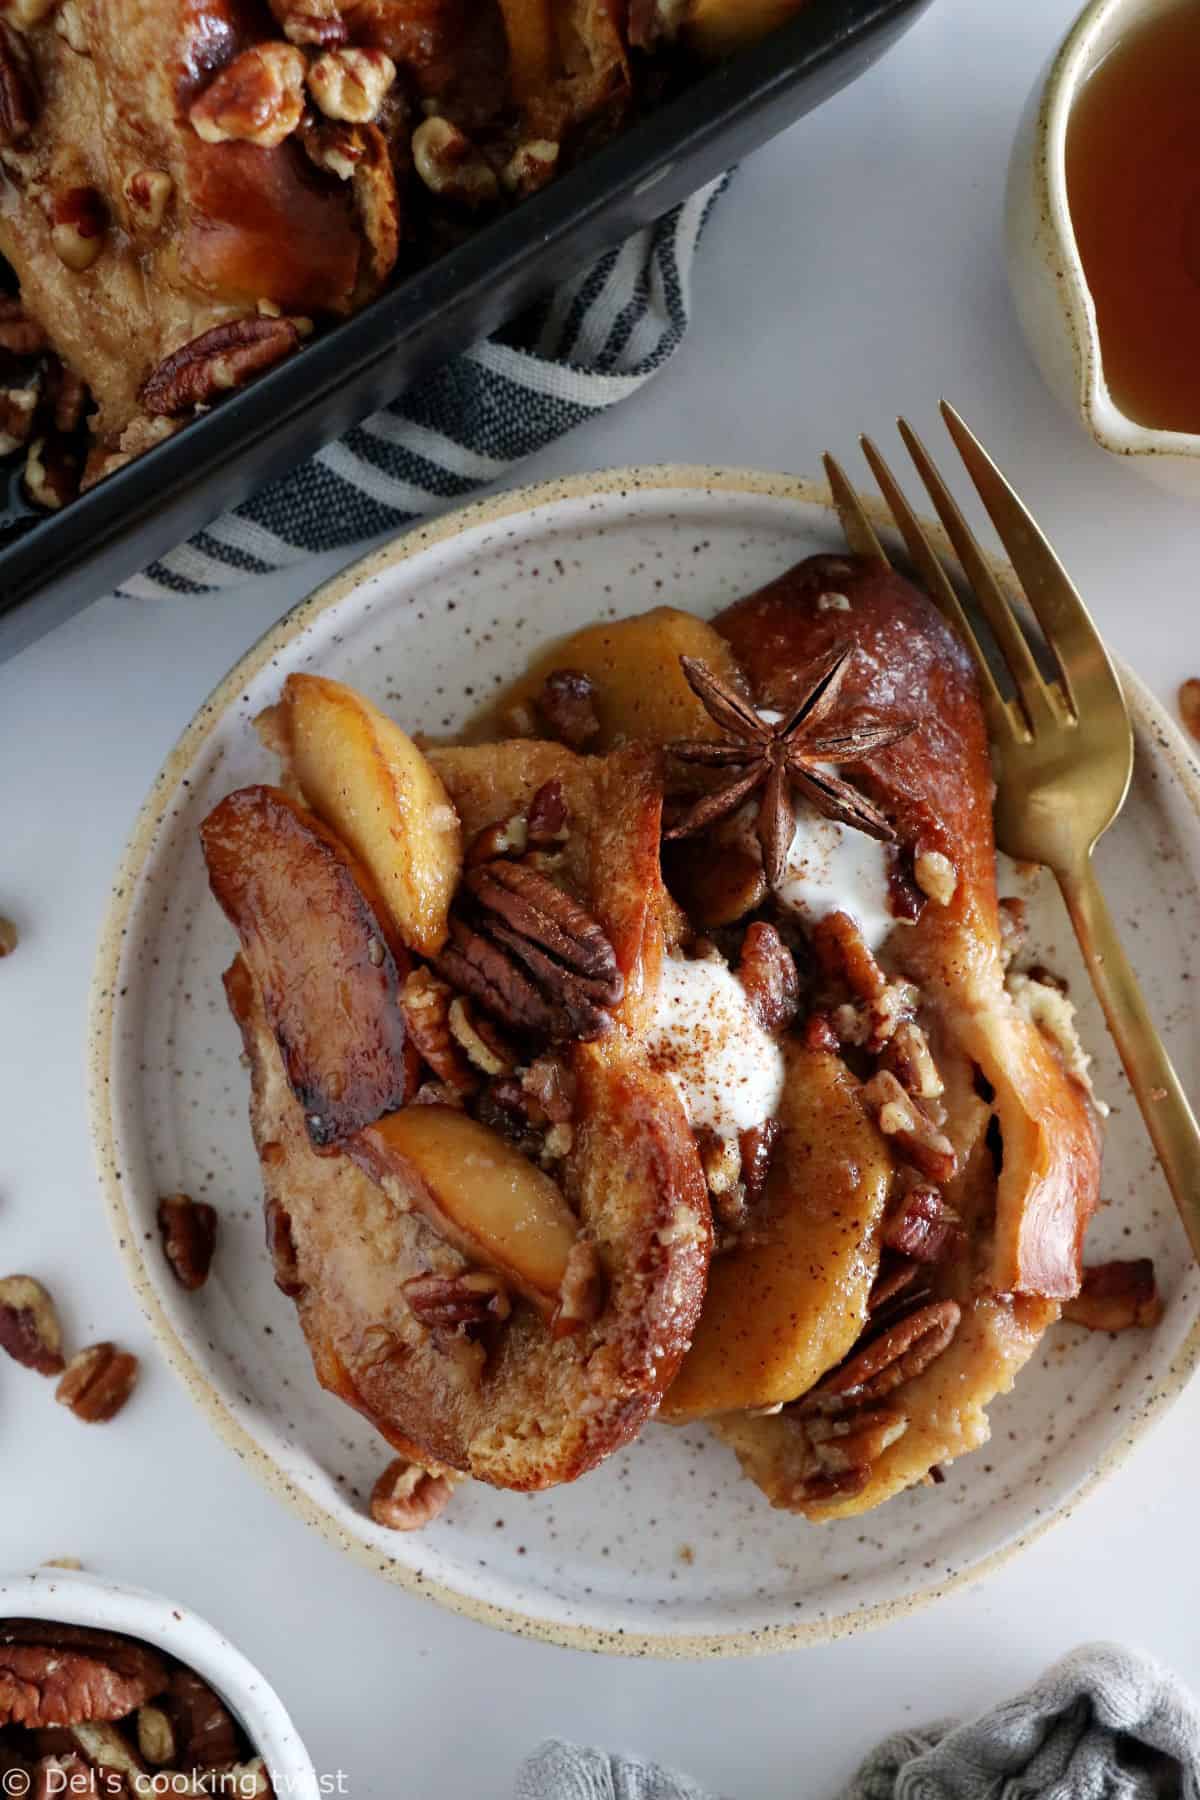 Baked Apple Pecan French Toast is the ultimate family breakfast, just perfect to feed a crowd. Both soft and crunchy, it features some thick challah bread slices, baked apples with a splash of whiskey, and an irresistible pecan-sugar mixture.